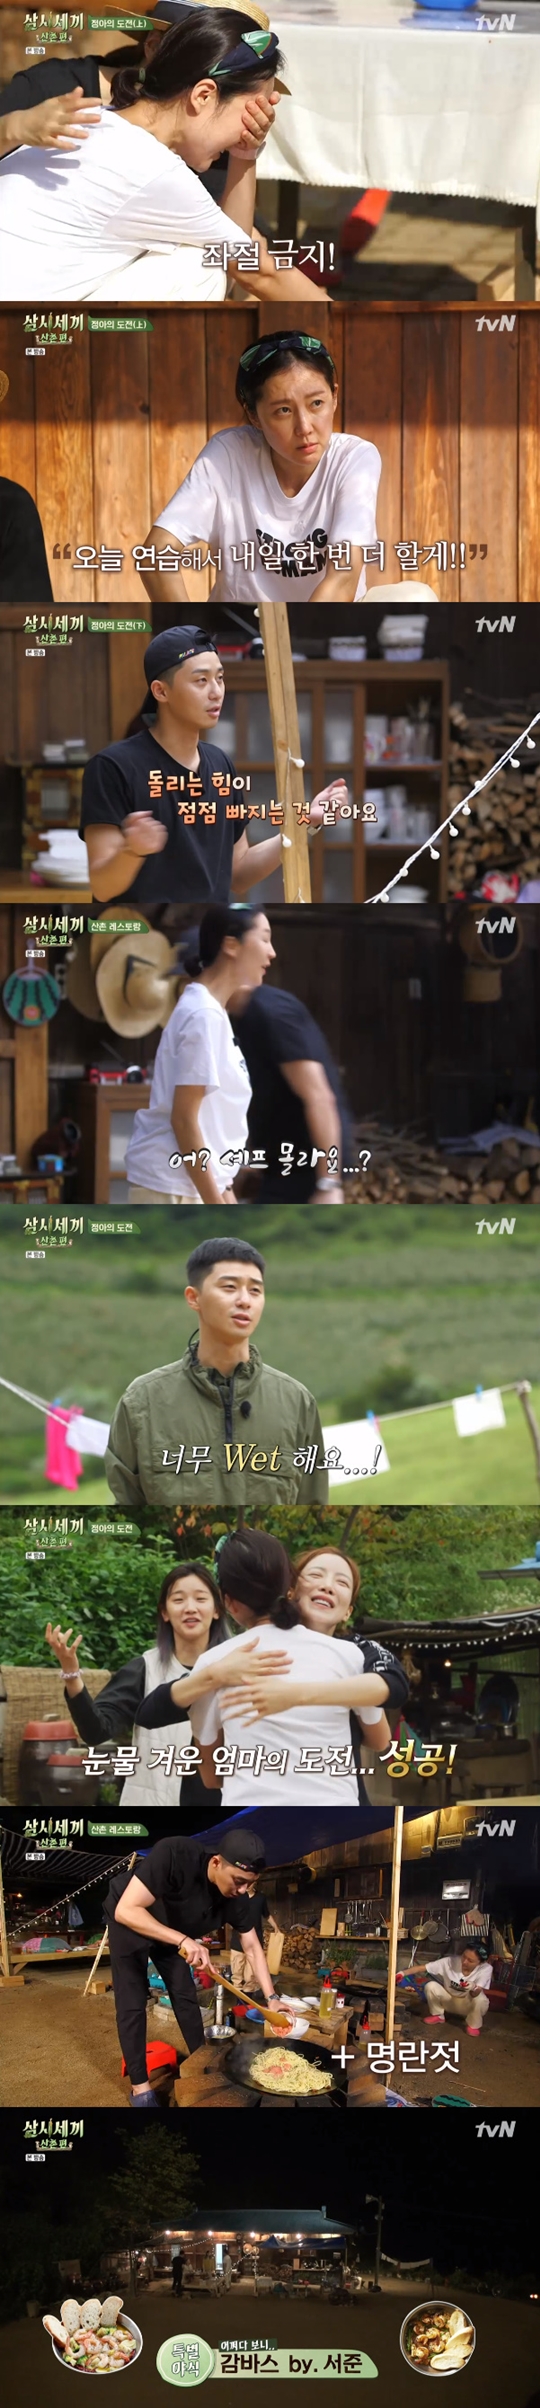 Park Seo-joon played a big role from Yum Jung-ah dedicated Kochi to the main chef in the evening.On October 11th, TVN Three Meals a Day Mountain Village, Park Seo-joon actively supported Yum Jung-ahs Top Model.In addition, he went on steak and pasta dishes for Yum Jung-ah, Yoon Se-ah, and Park So-dam.On the day, Yum Jung-ah went to 10 Top Model for jumping rope with pocket money at the suggestion of Na Young-seok.However, Yum Jung-ah laughed beyond jumping rope in a sloppy posture, and eventually failed to top Model and lost 5,000 won.Park Seo-joon comforted Yum Jung-ah, who was sorry, saying, It was good.Yum Jung-ah announced his intention to top Model once again the next day, so Park Seo-joon went on a rope-skipping coaching himself.From how to hold a line to how to turn, to how to beat, Park Seo-joon passionately taught Yum Jung-ah.Yum Jung-ah also practiced during the preparation of the meal.The next morning, Yum Jung-ah stood in front of Na Young-seok with a special determination.But Na Young-Seok PD insisted: I had enough practice yesterday so I have to do 20 Top Model, not 12.So Jillsera Park Seo-joon appealed, Its raining and the ground is wet, and agreed with 16 Top Model.Yum Jung-ah took a tense heart and started jumping rope.Yum Jung-ah, calmly lined up as Park Seo-joon taught, succeeded in 16 Top Model, and won an allowance of 10,000 won.I ran thinking about our children, he said, making everyone laugh.Park Seo-joon, who was Yum Jung-ah Kochi, turned into the main chef at dinner time.Park Seo-joon brought steak and pasta ingredients directly for Yum Jung-ah, Yoon Se-ah and Park So-dam.Park Seo-joon, who had a bad appearance in the early days, made Yum Jung-ah uneasy for a while, but soon showed a professional aspect by directing the recipe.Yum Jung-ah, Yoon Se-ah and Park So-dam, who were impressed by the steak and pasta flavors, gave thanks to Park Seo-joon.Not only that, Park Seo-joon made Gambas for the three of them at night.Everyone praised Park Seo-joon for making a twig during the night.Park So-hee